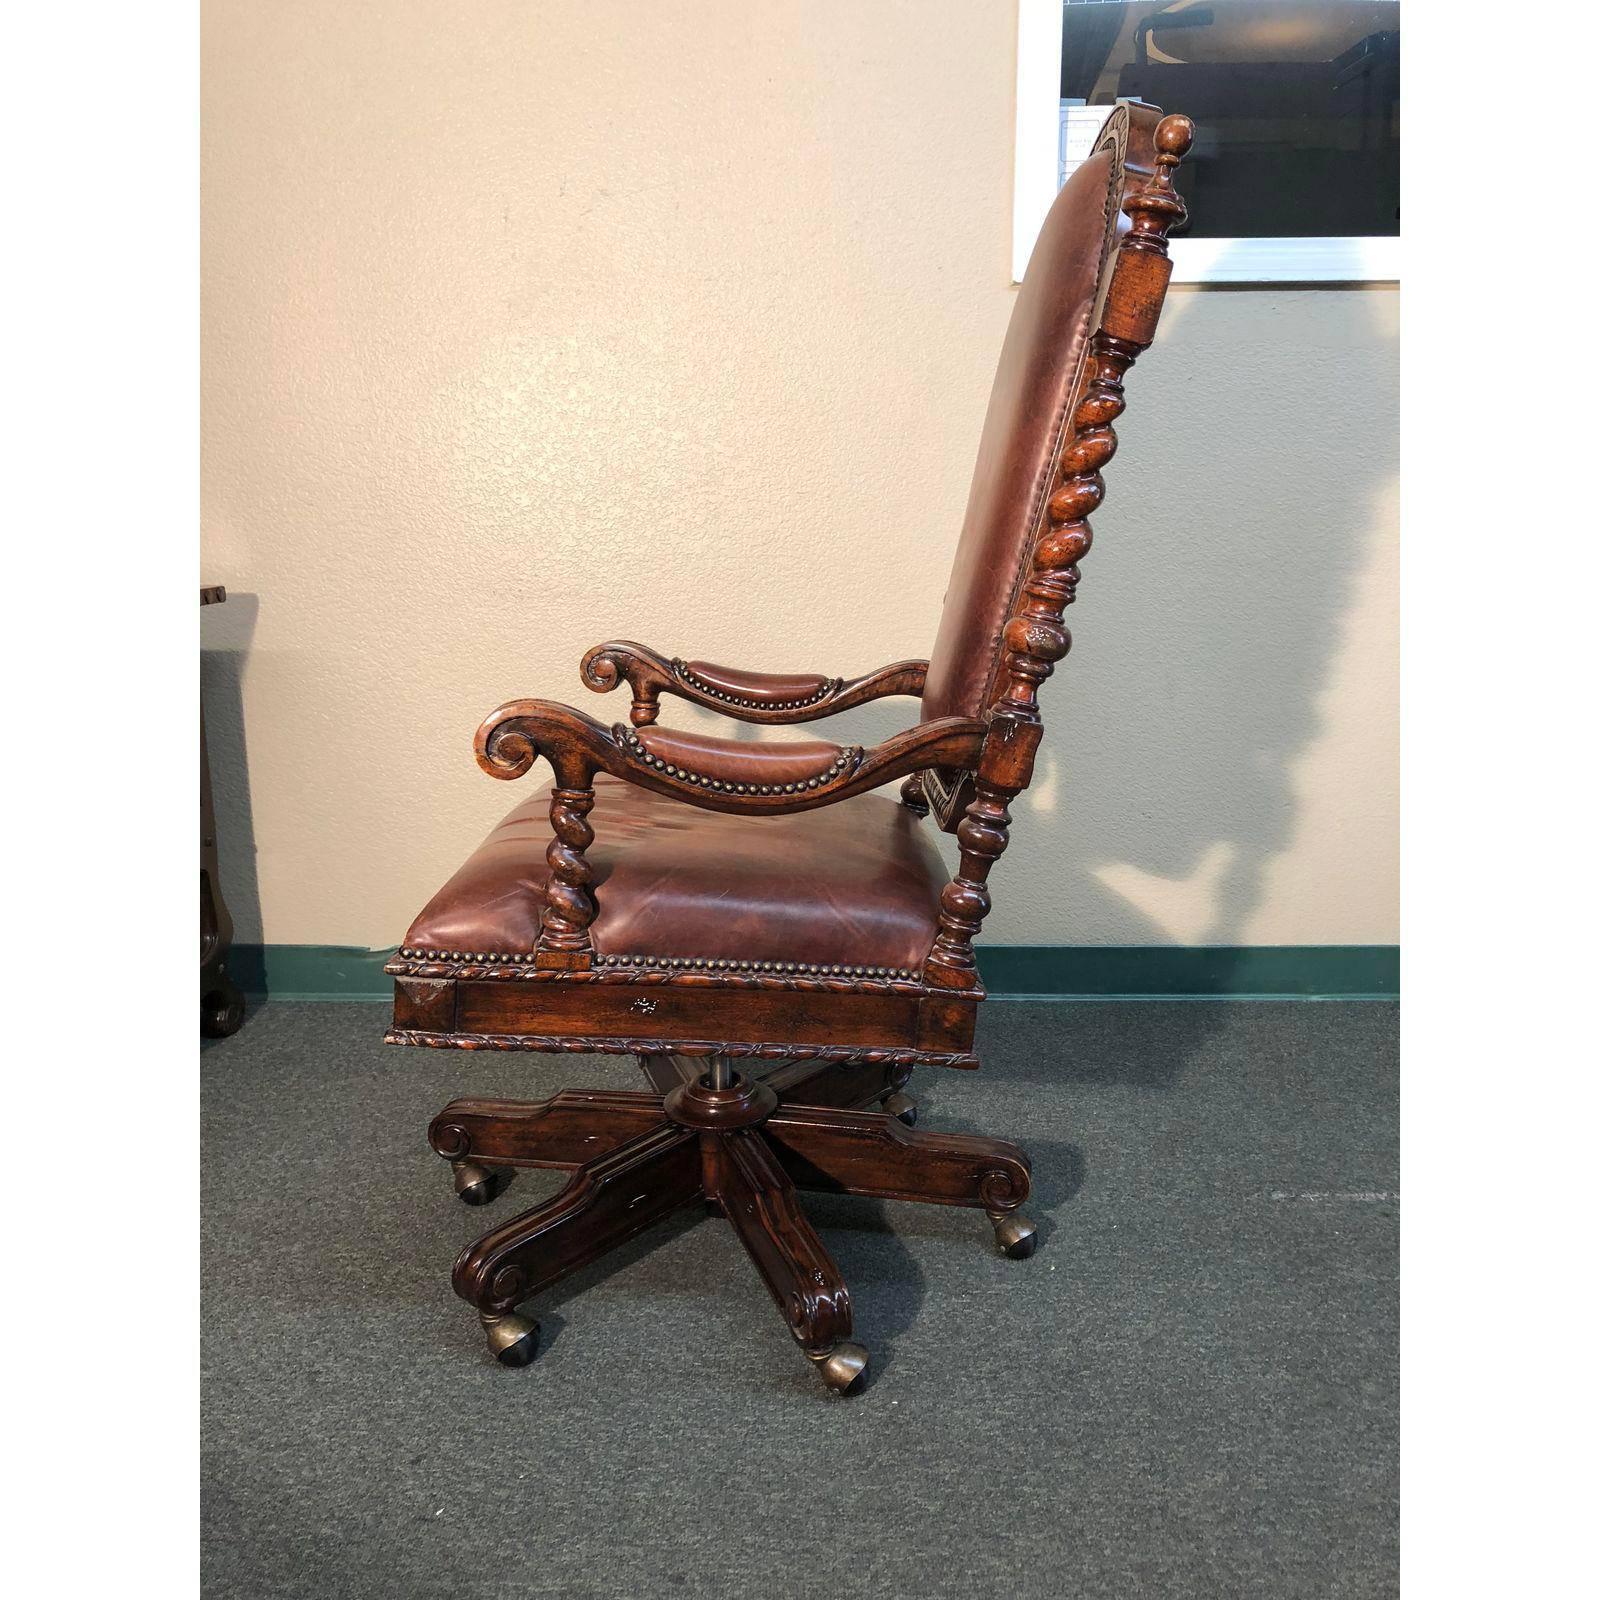 A Lido desk chair by Maitland-Smith. A natural to pair with an executive desk, the dark mahogany finished beauty is rich in details. Carved and distressed wood, barley twists, rich leather and antiqued nailhead all project earned success. Adjustable